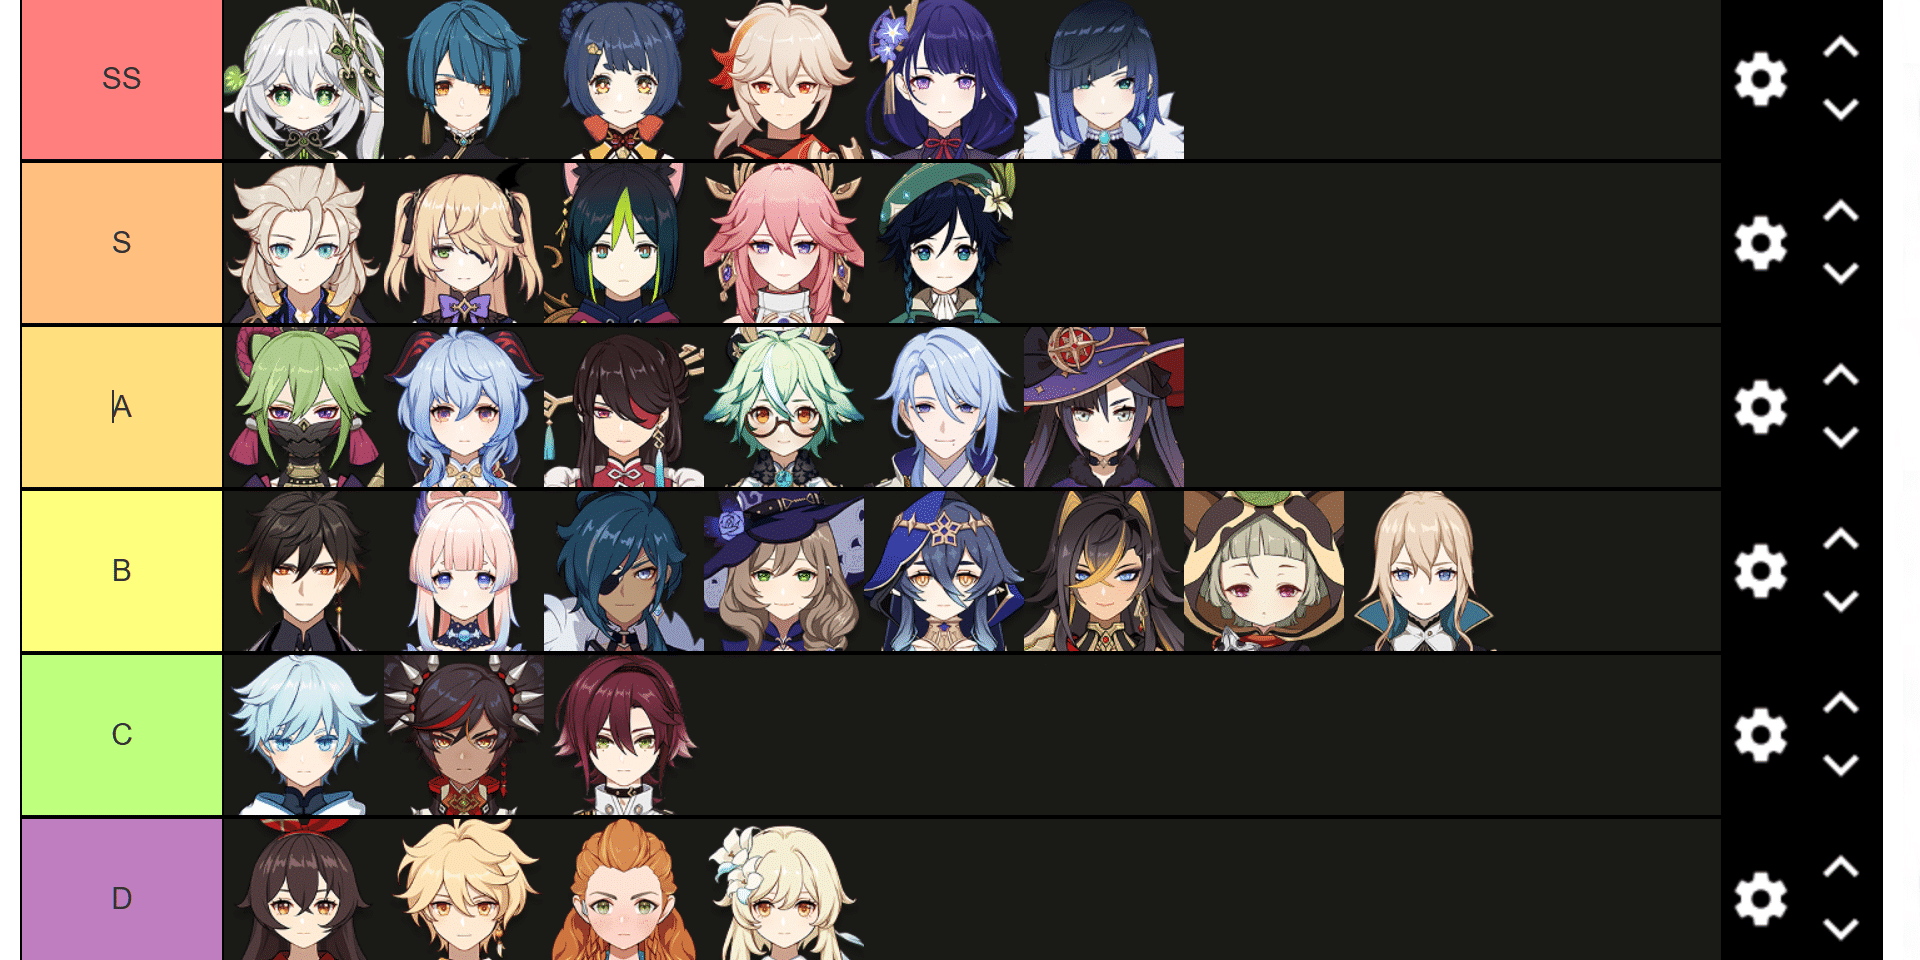 Updated my tier list! It's a combination on how good they are and